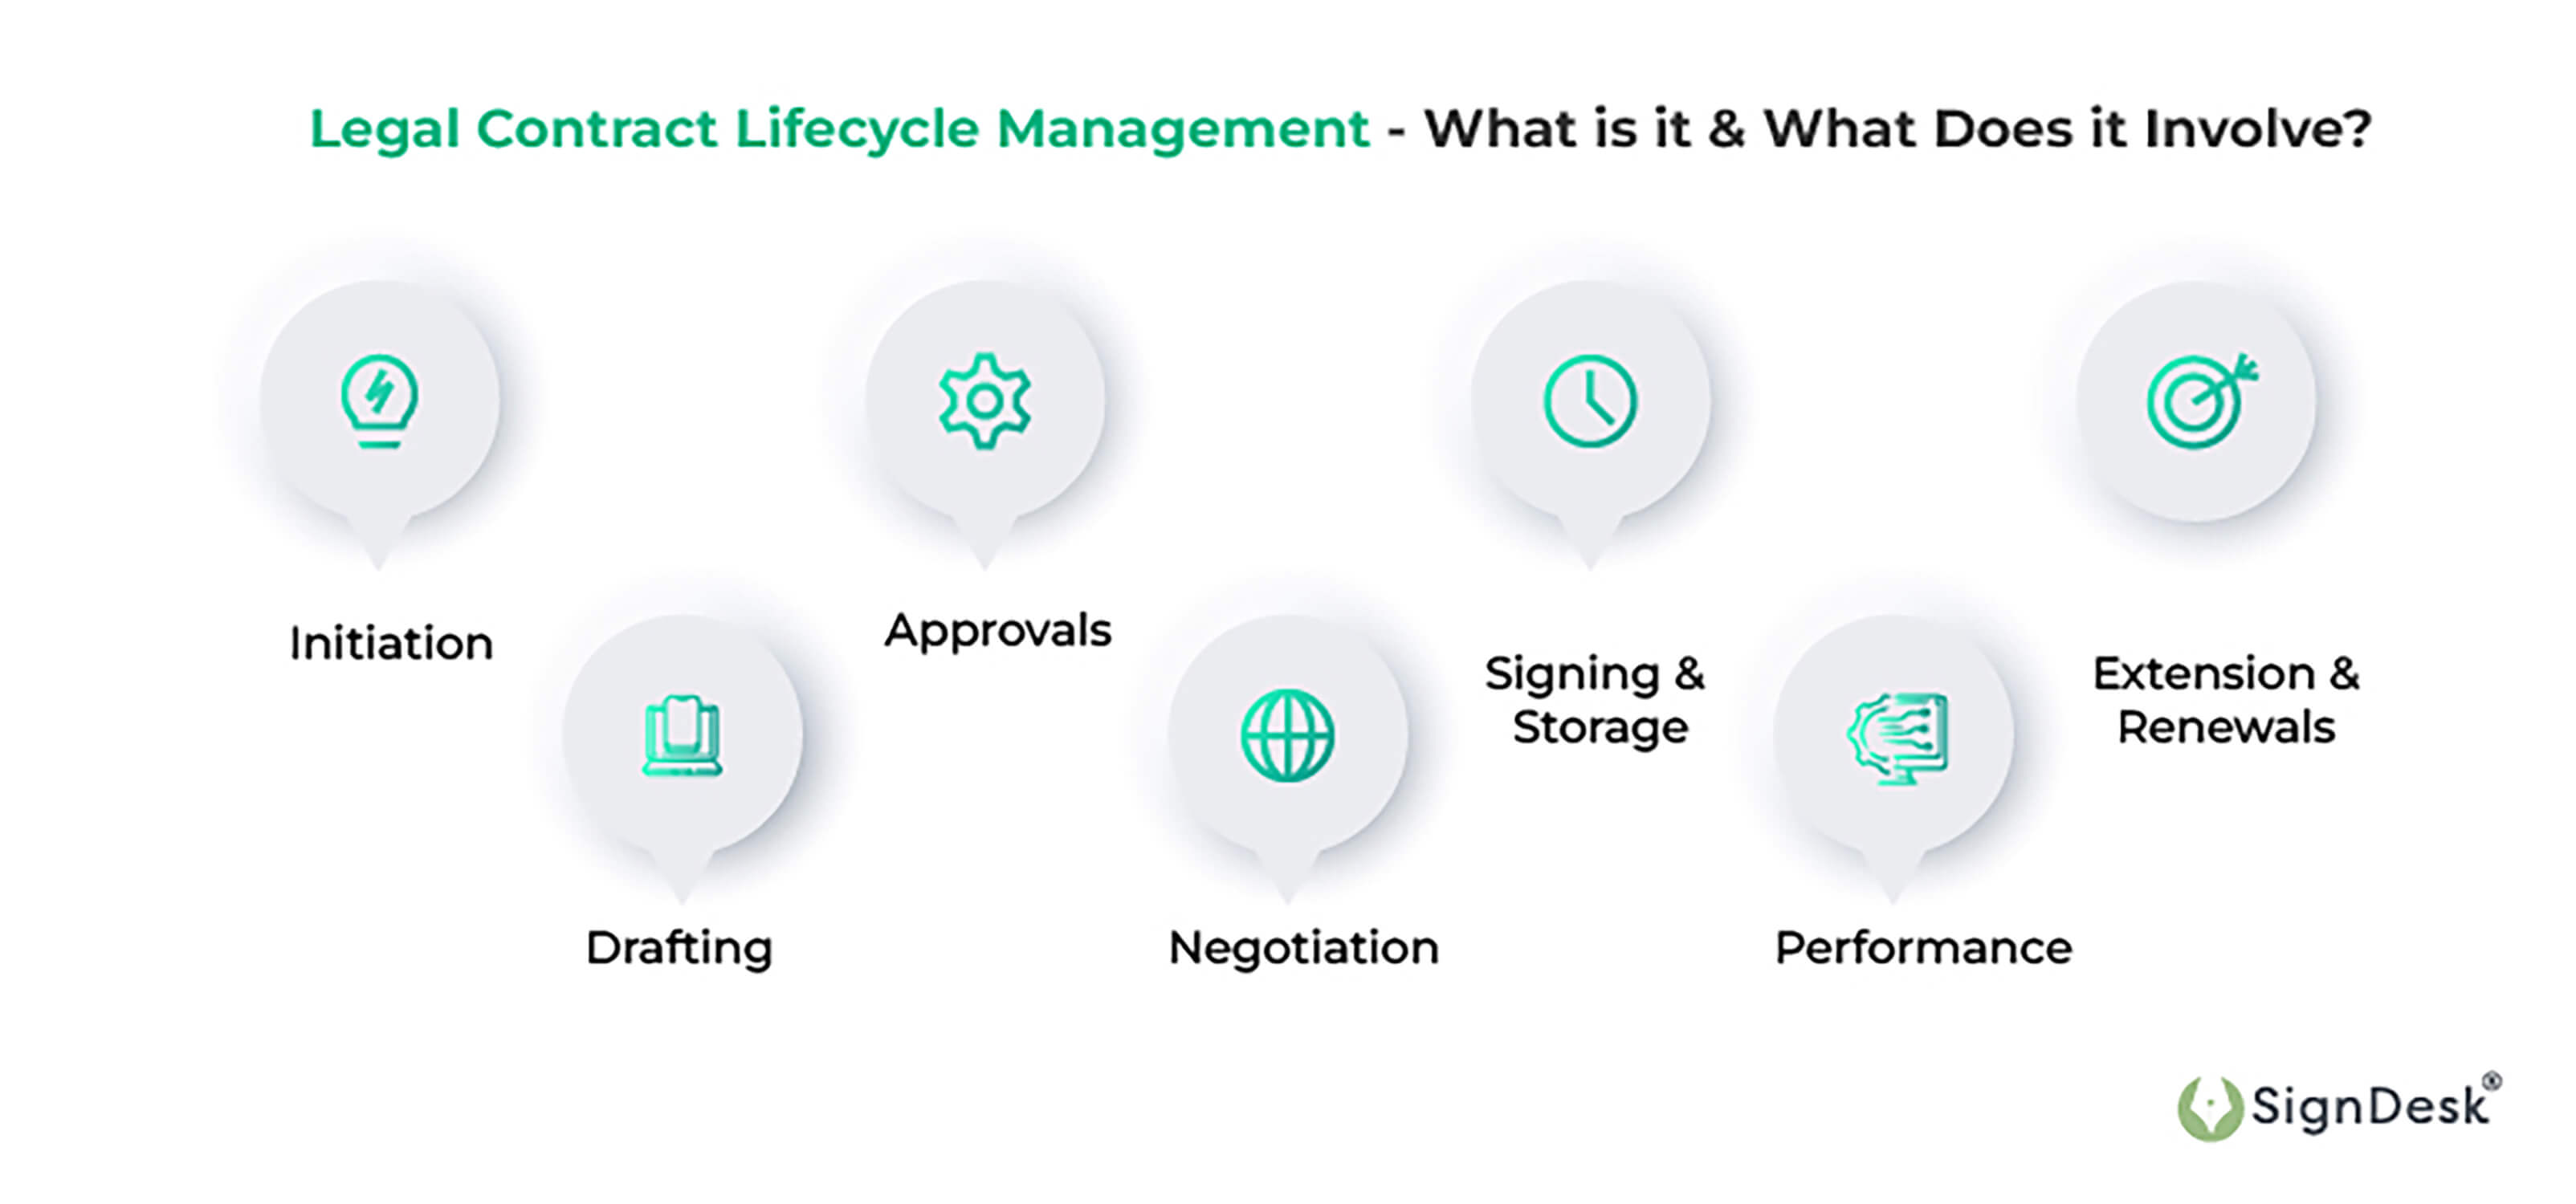 legal contract lifecycle management procedure and steps